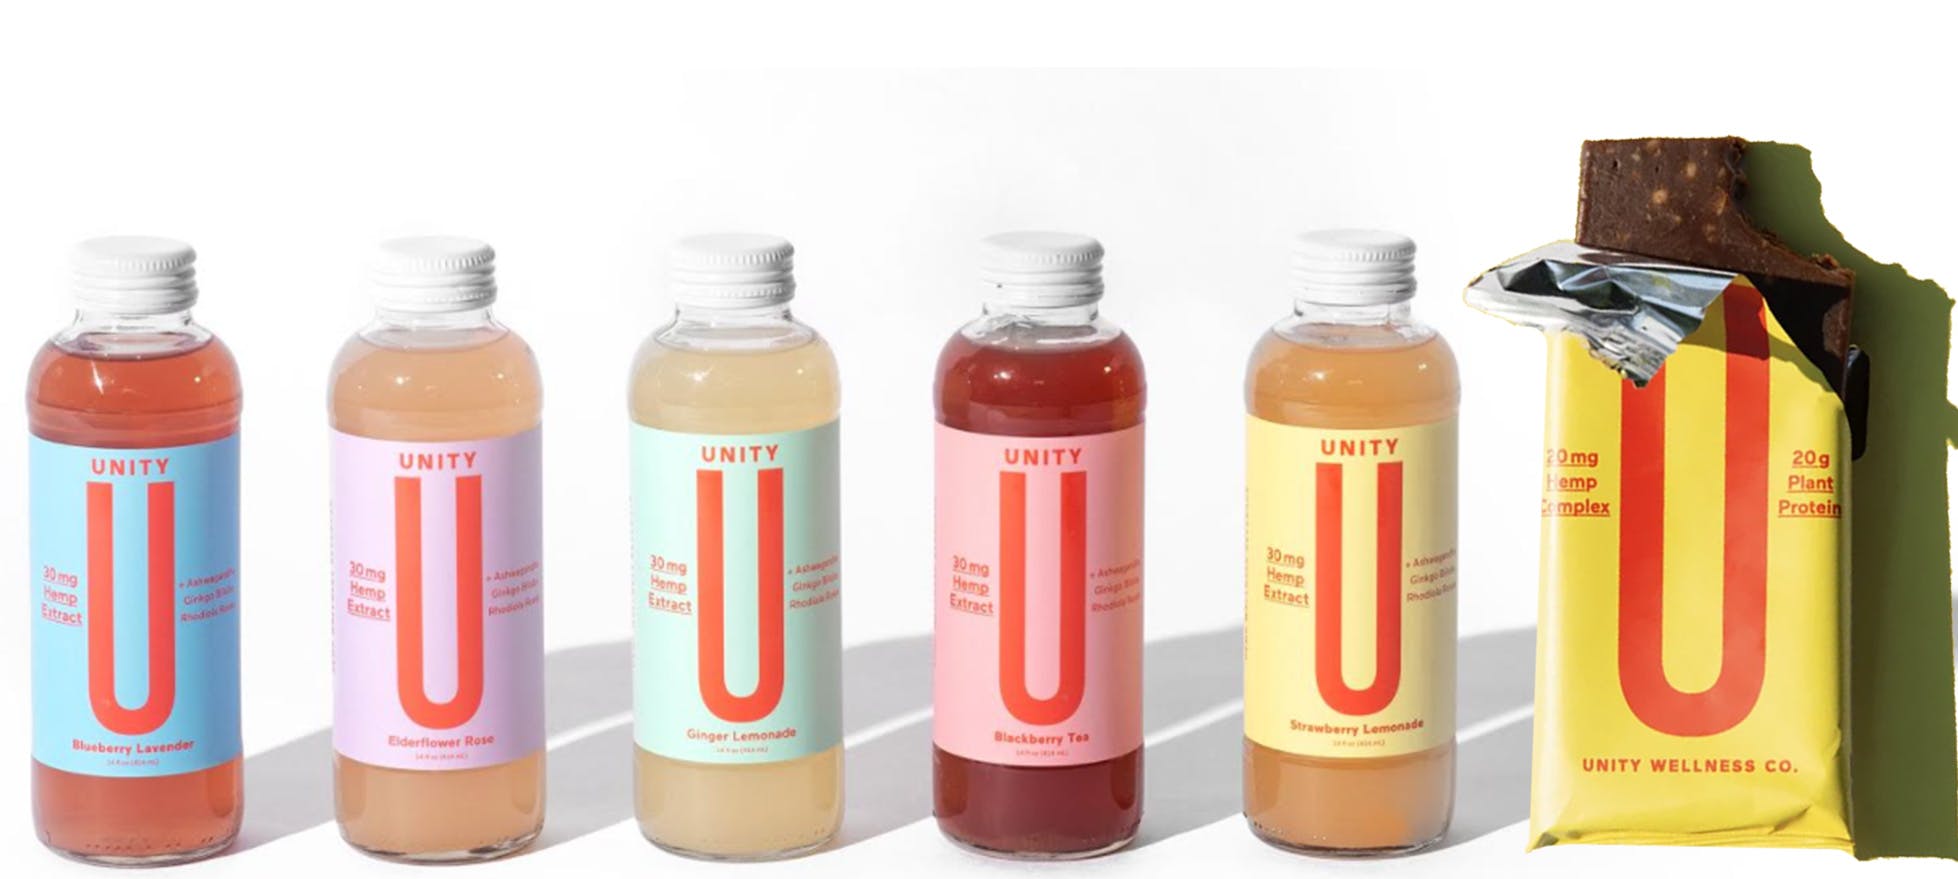 UNITY Wellness Co. CBD beverages and protein bars.